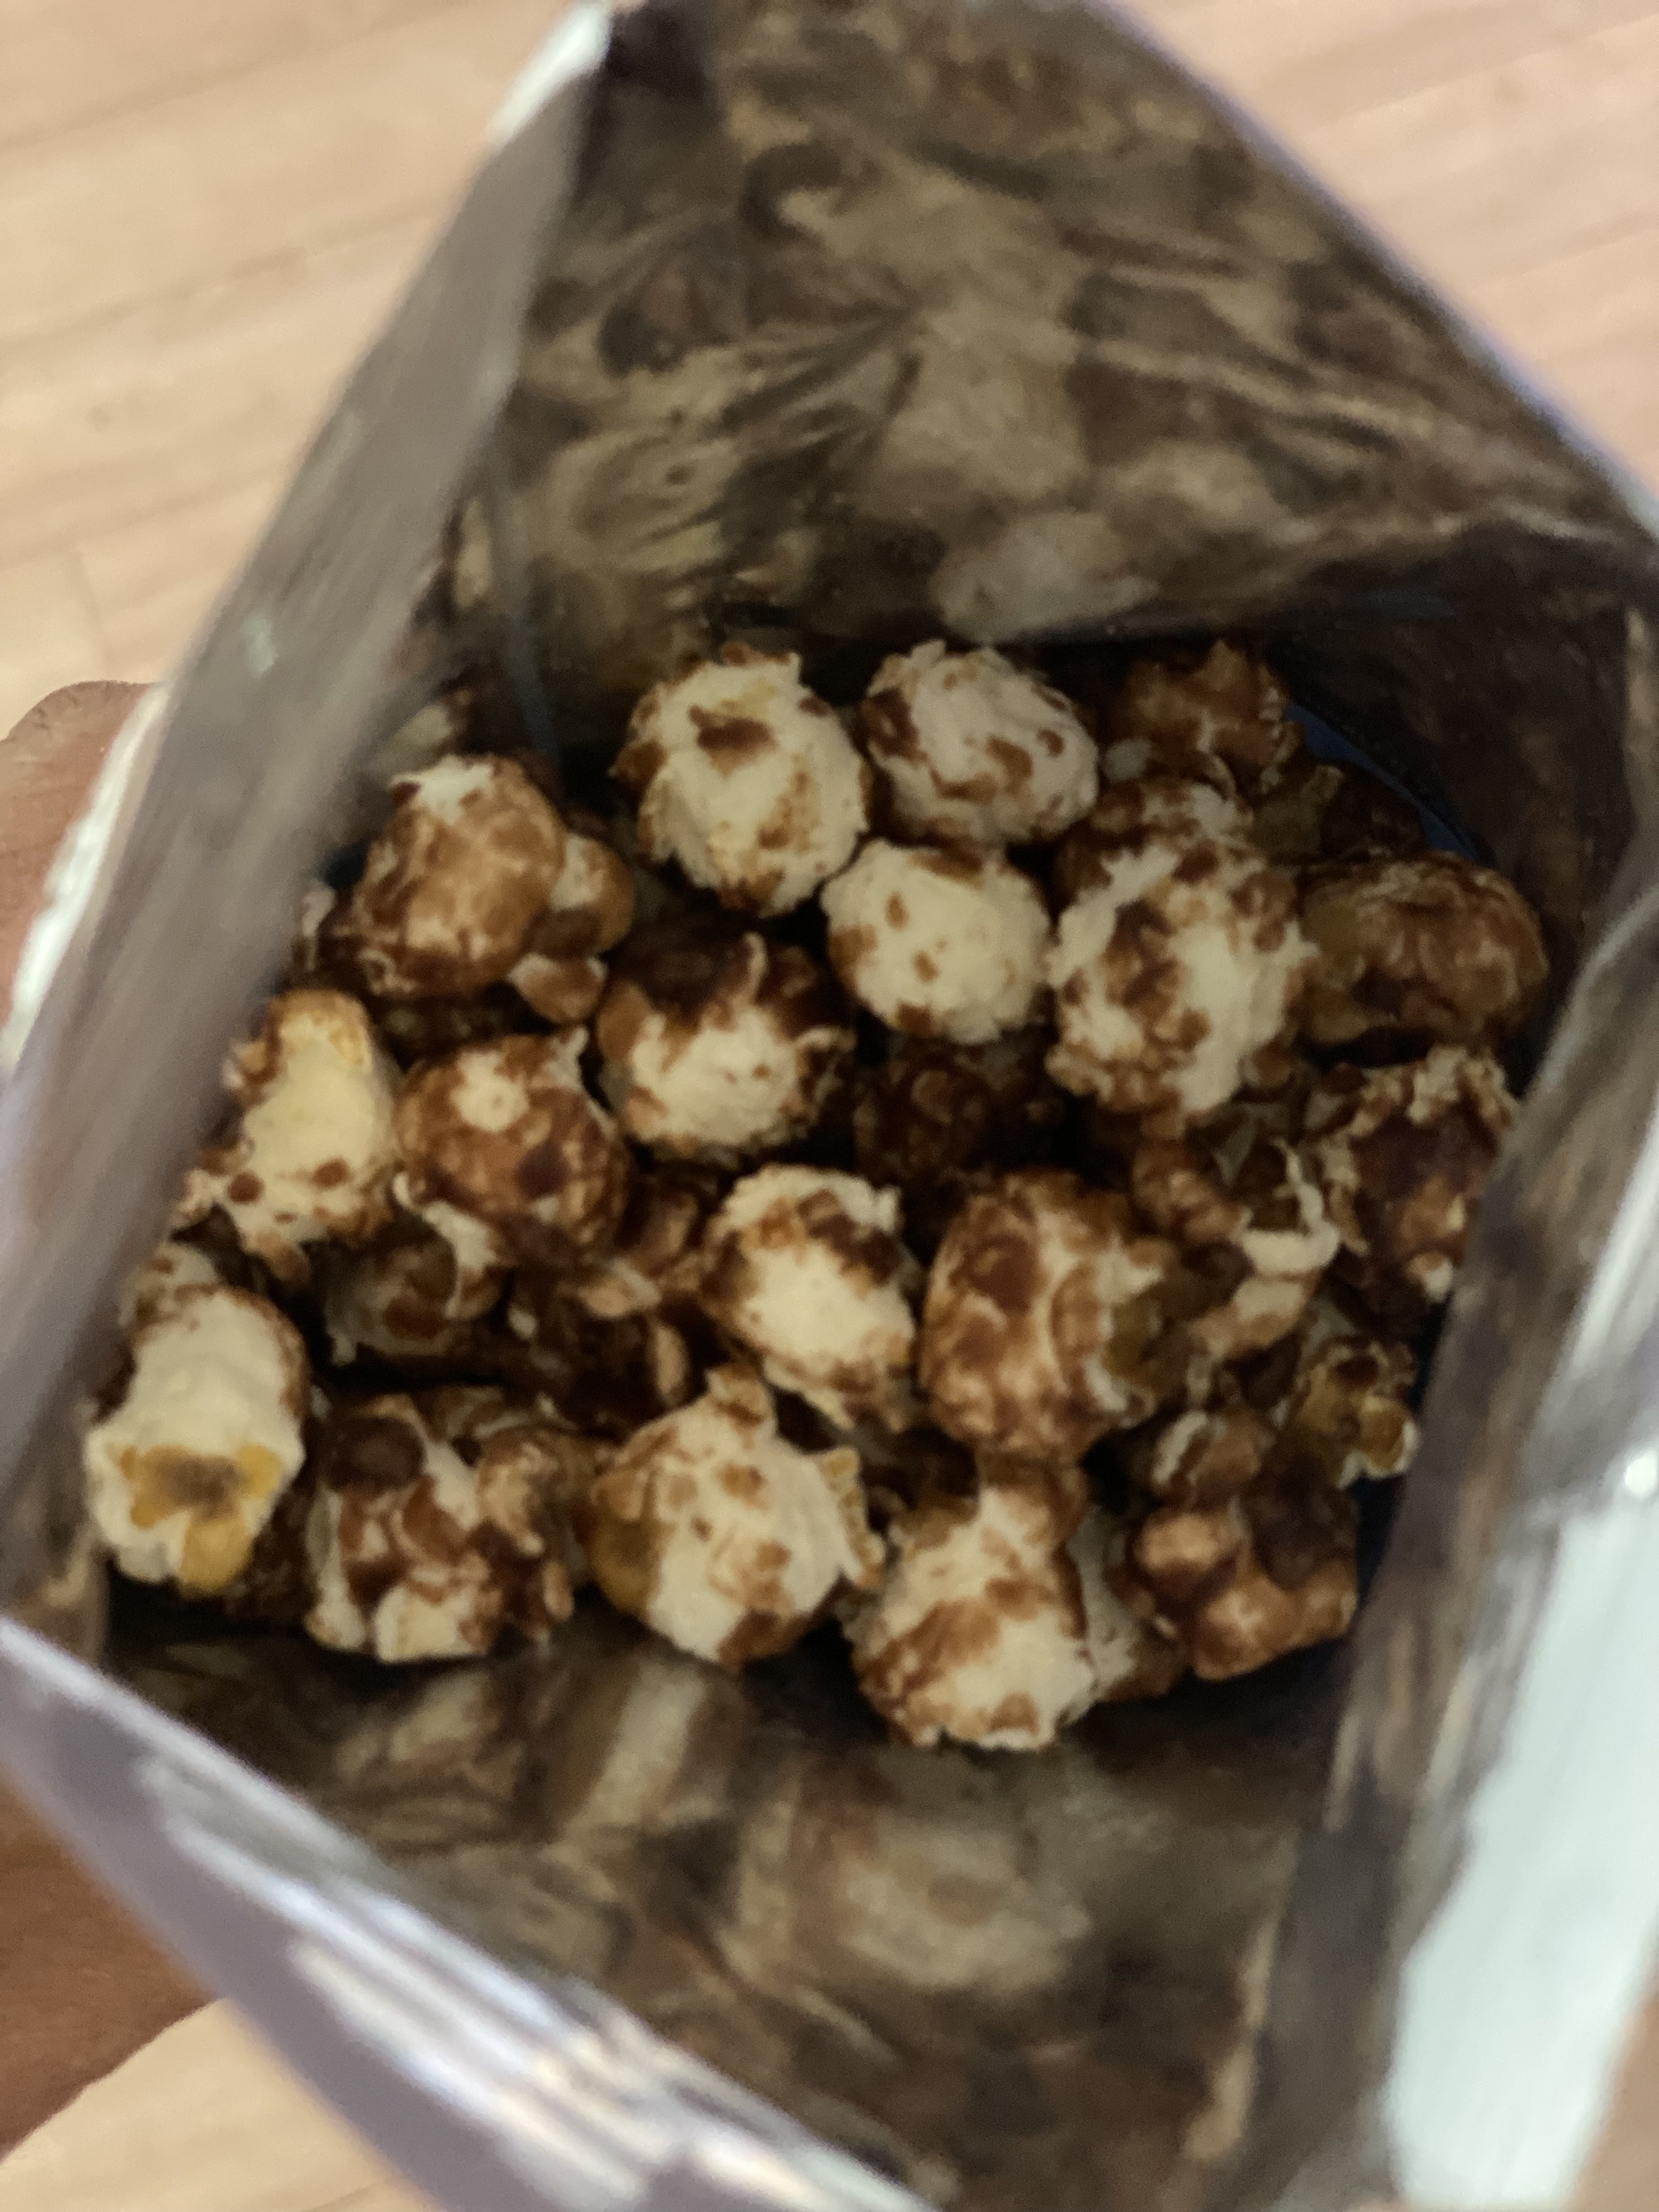 open bag with popcorn inside